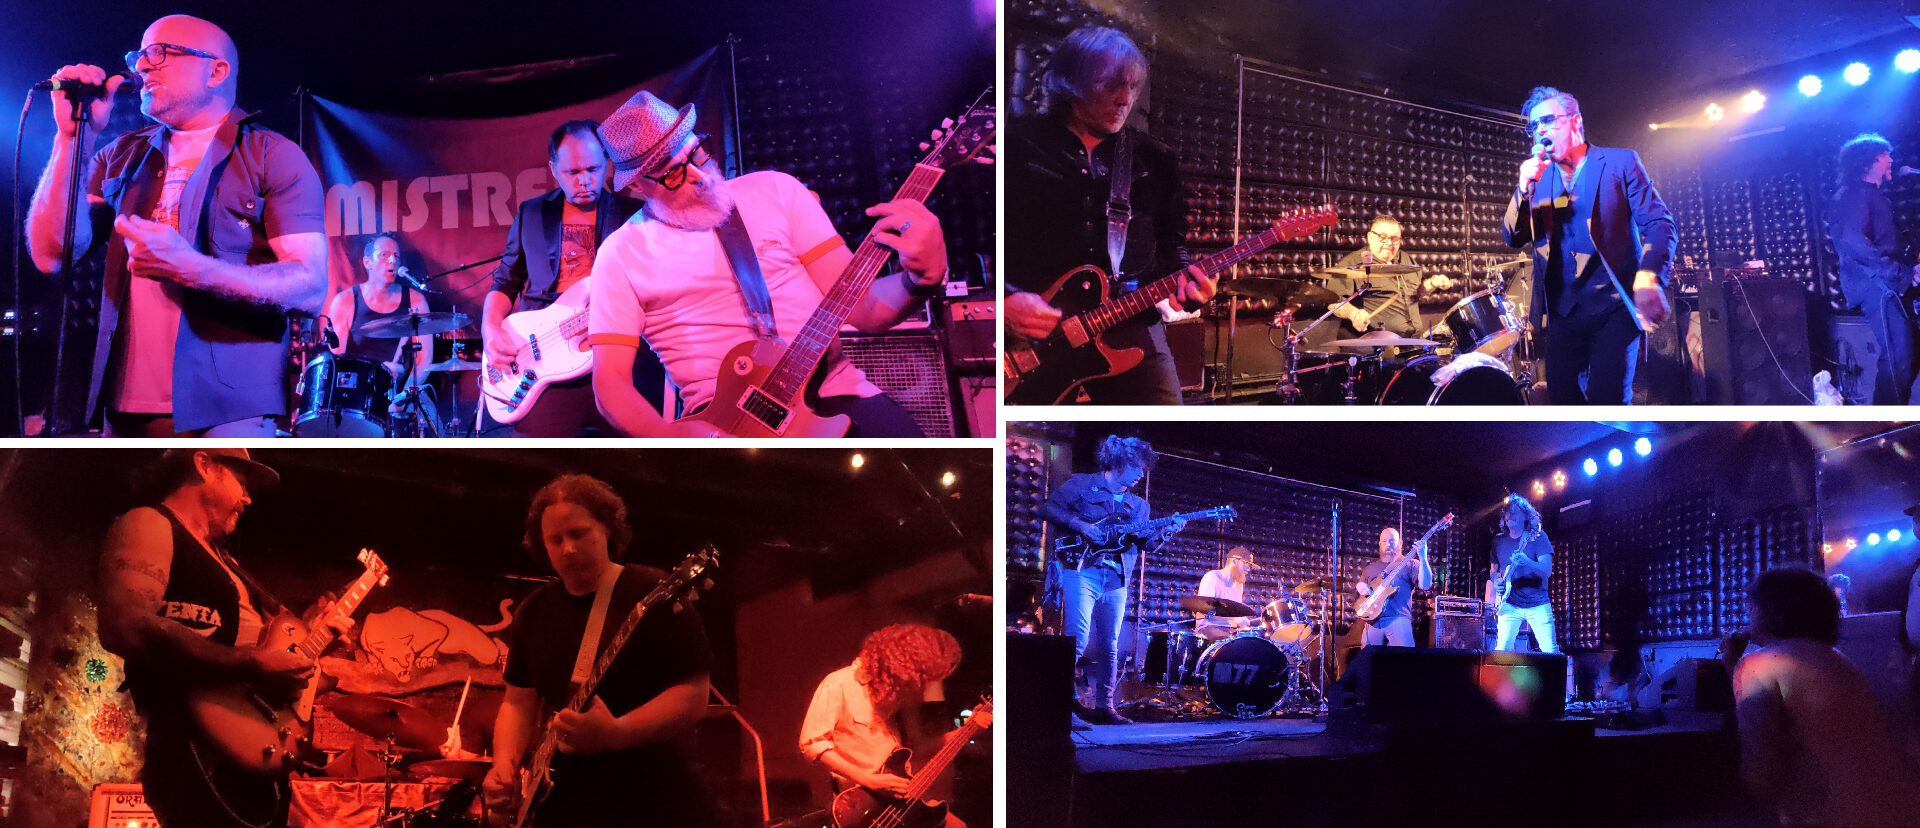 Show Review: Mistress 77, Whiskey Dicks, Soulseller, and Funhouse at the Casbah June 29, 2024